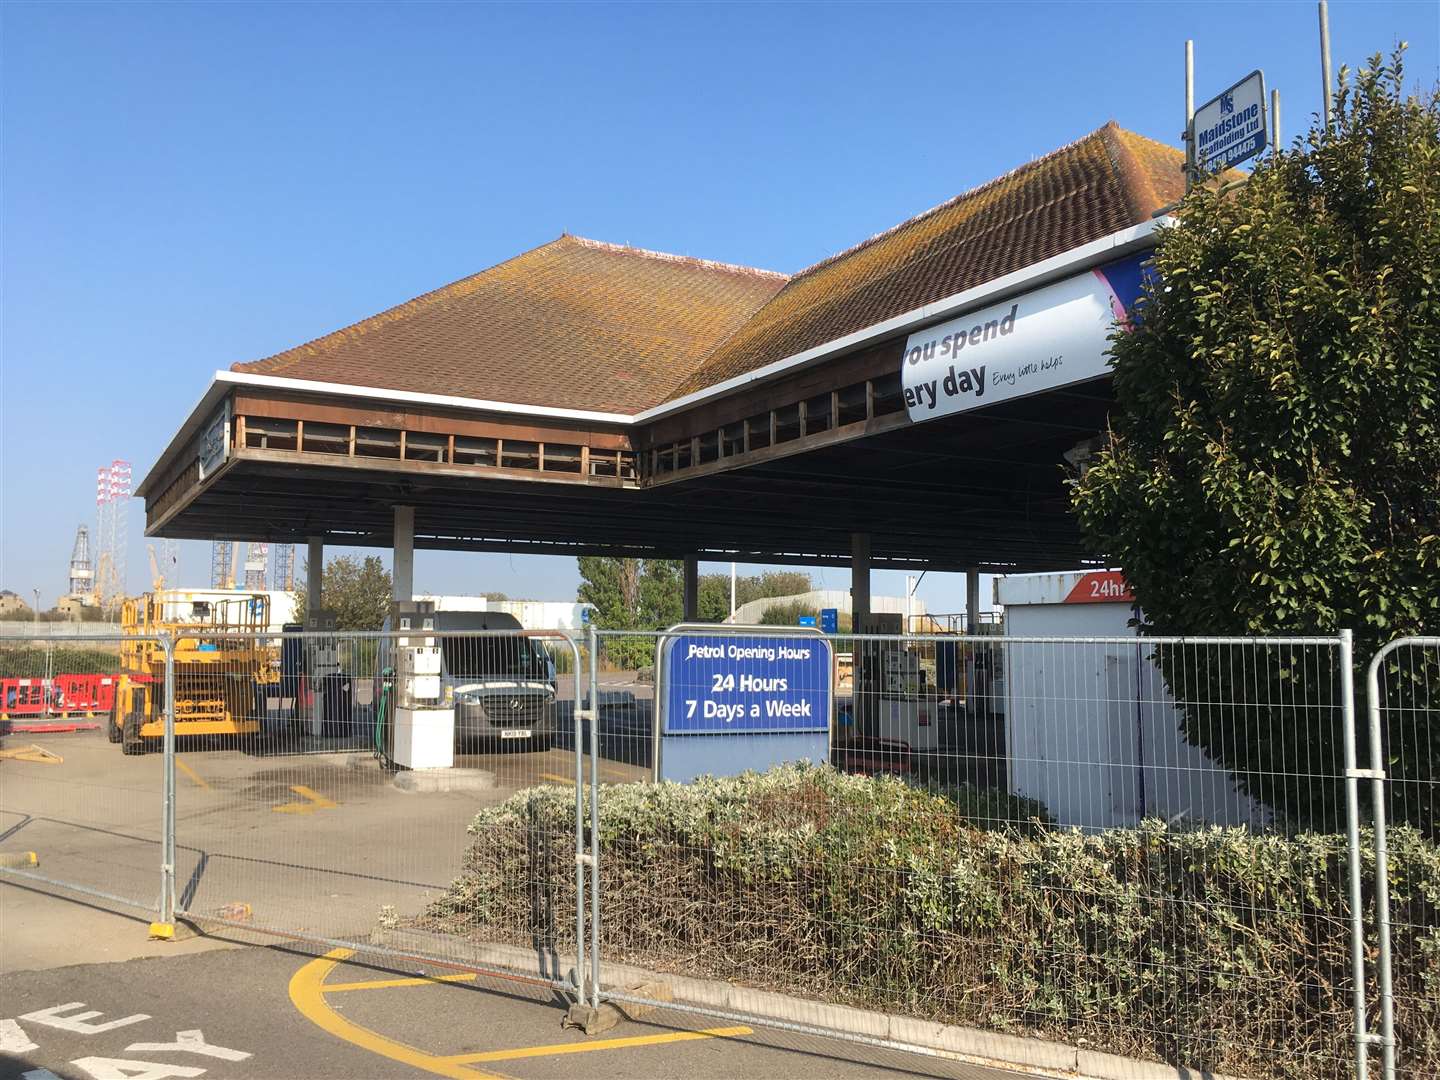 Tesco petrol station in Bridge Road, Sheerness, is closed while it gets a facelift and a new canopy over the pumps